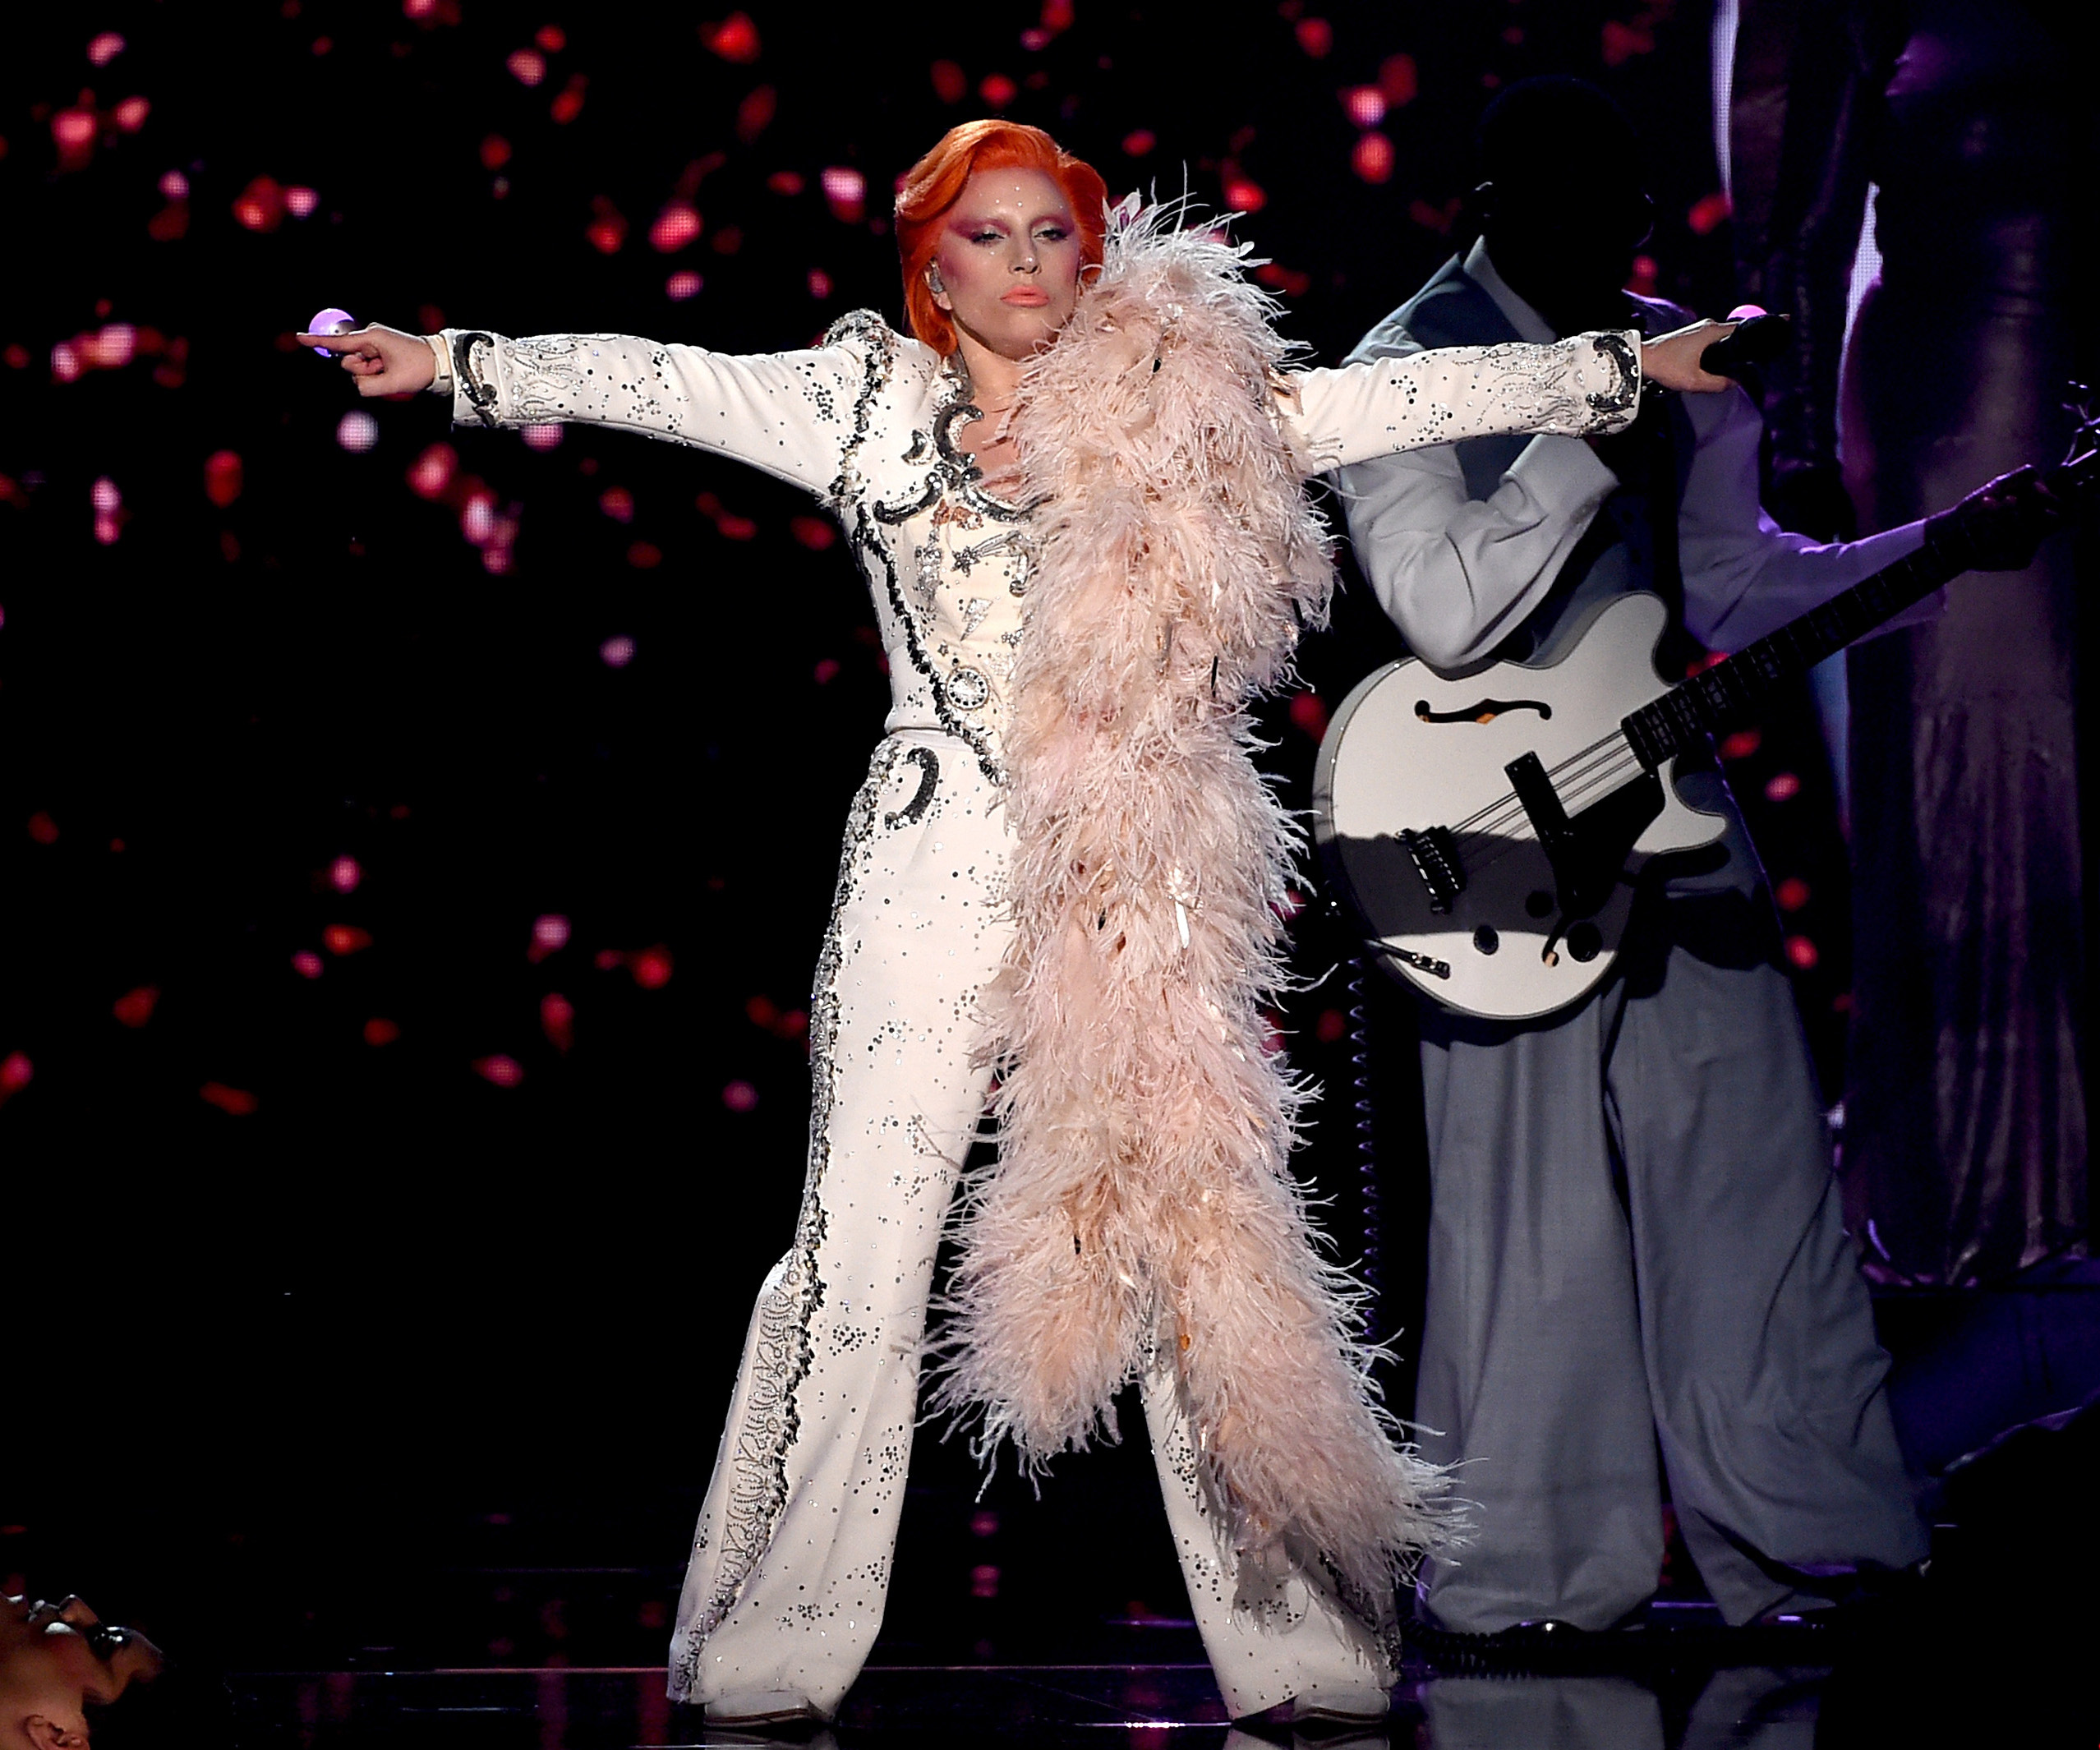 Lady Gaga pays tribute to David Bowie at the Grammys